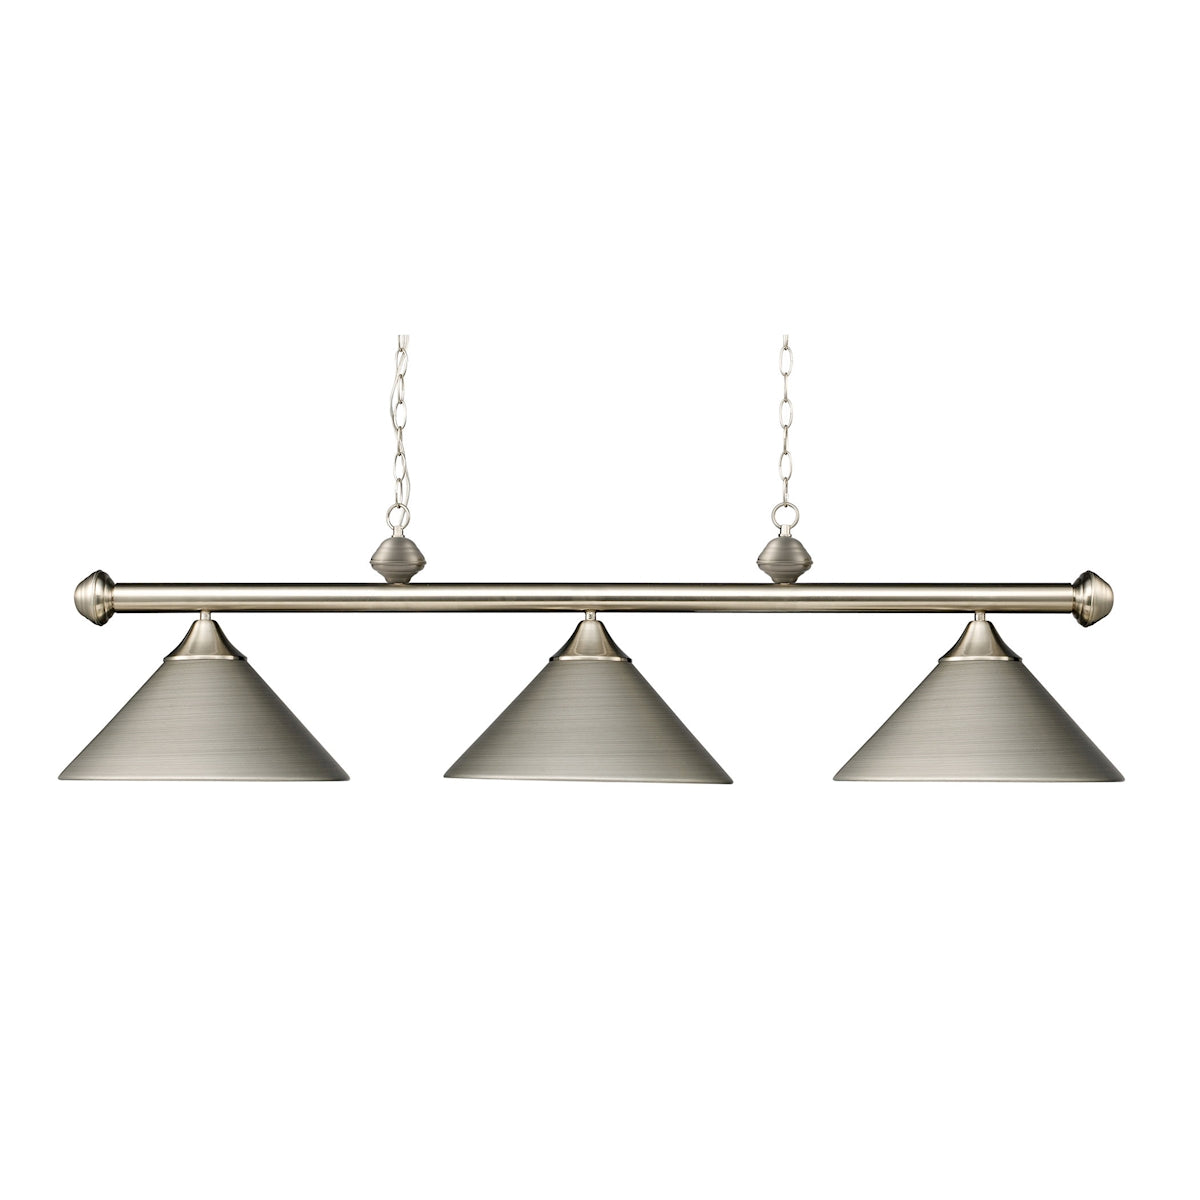 ELK Lighting 168-SN Casual Traditions 3-Light Island Light in Satin Nickel with Metal Shades